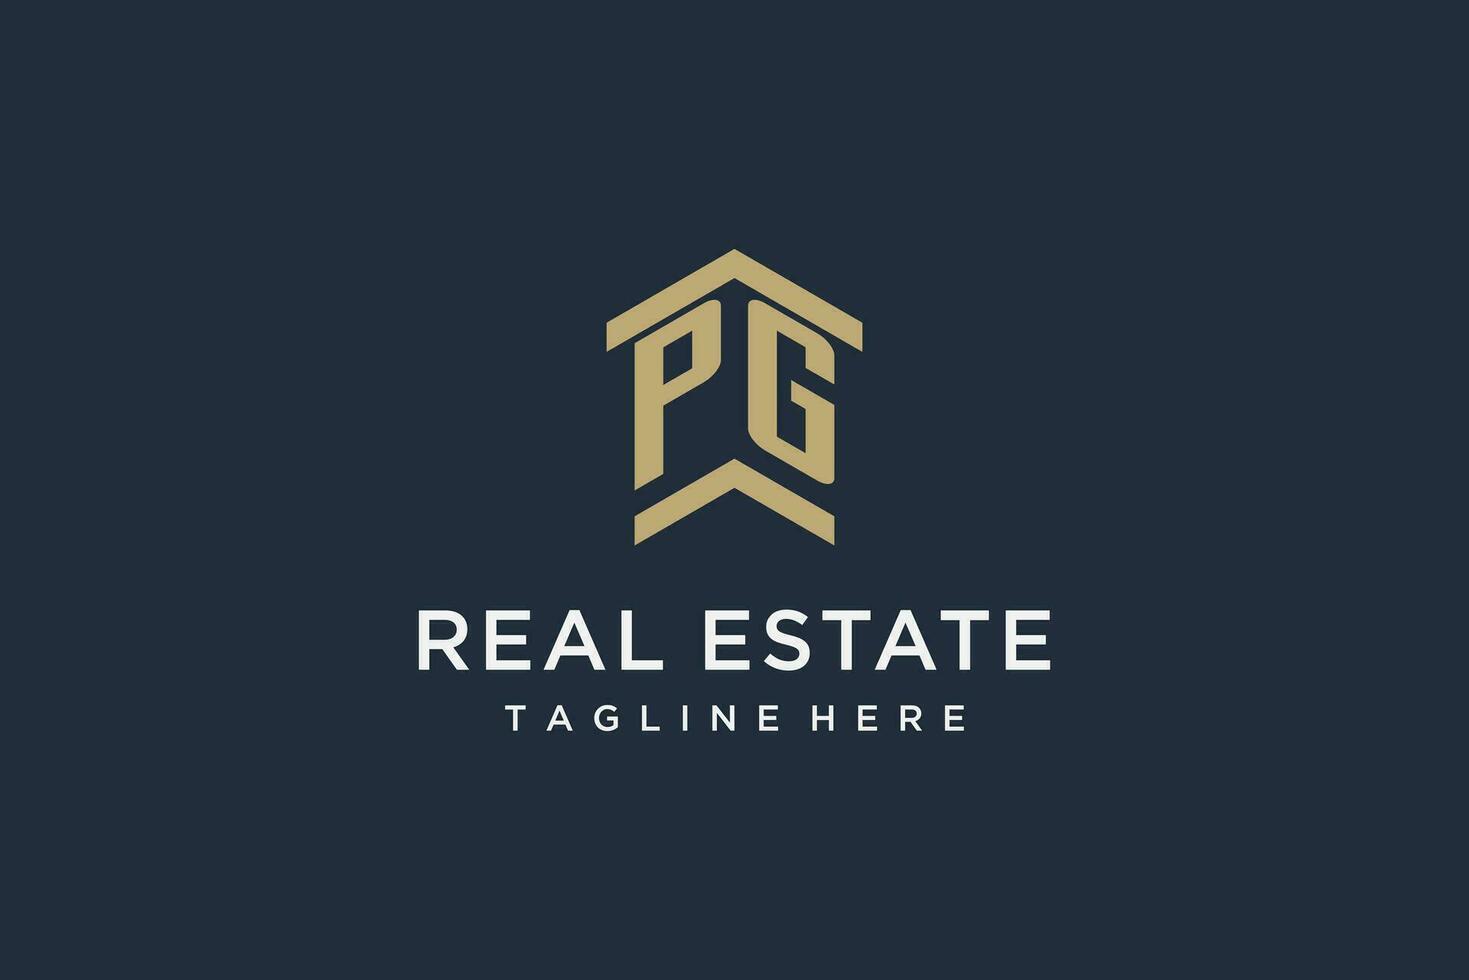 Initial PG logo for real estate with simple and creative house roof icon logo design ideas vector